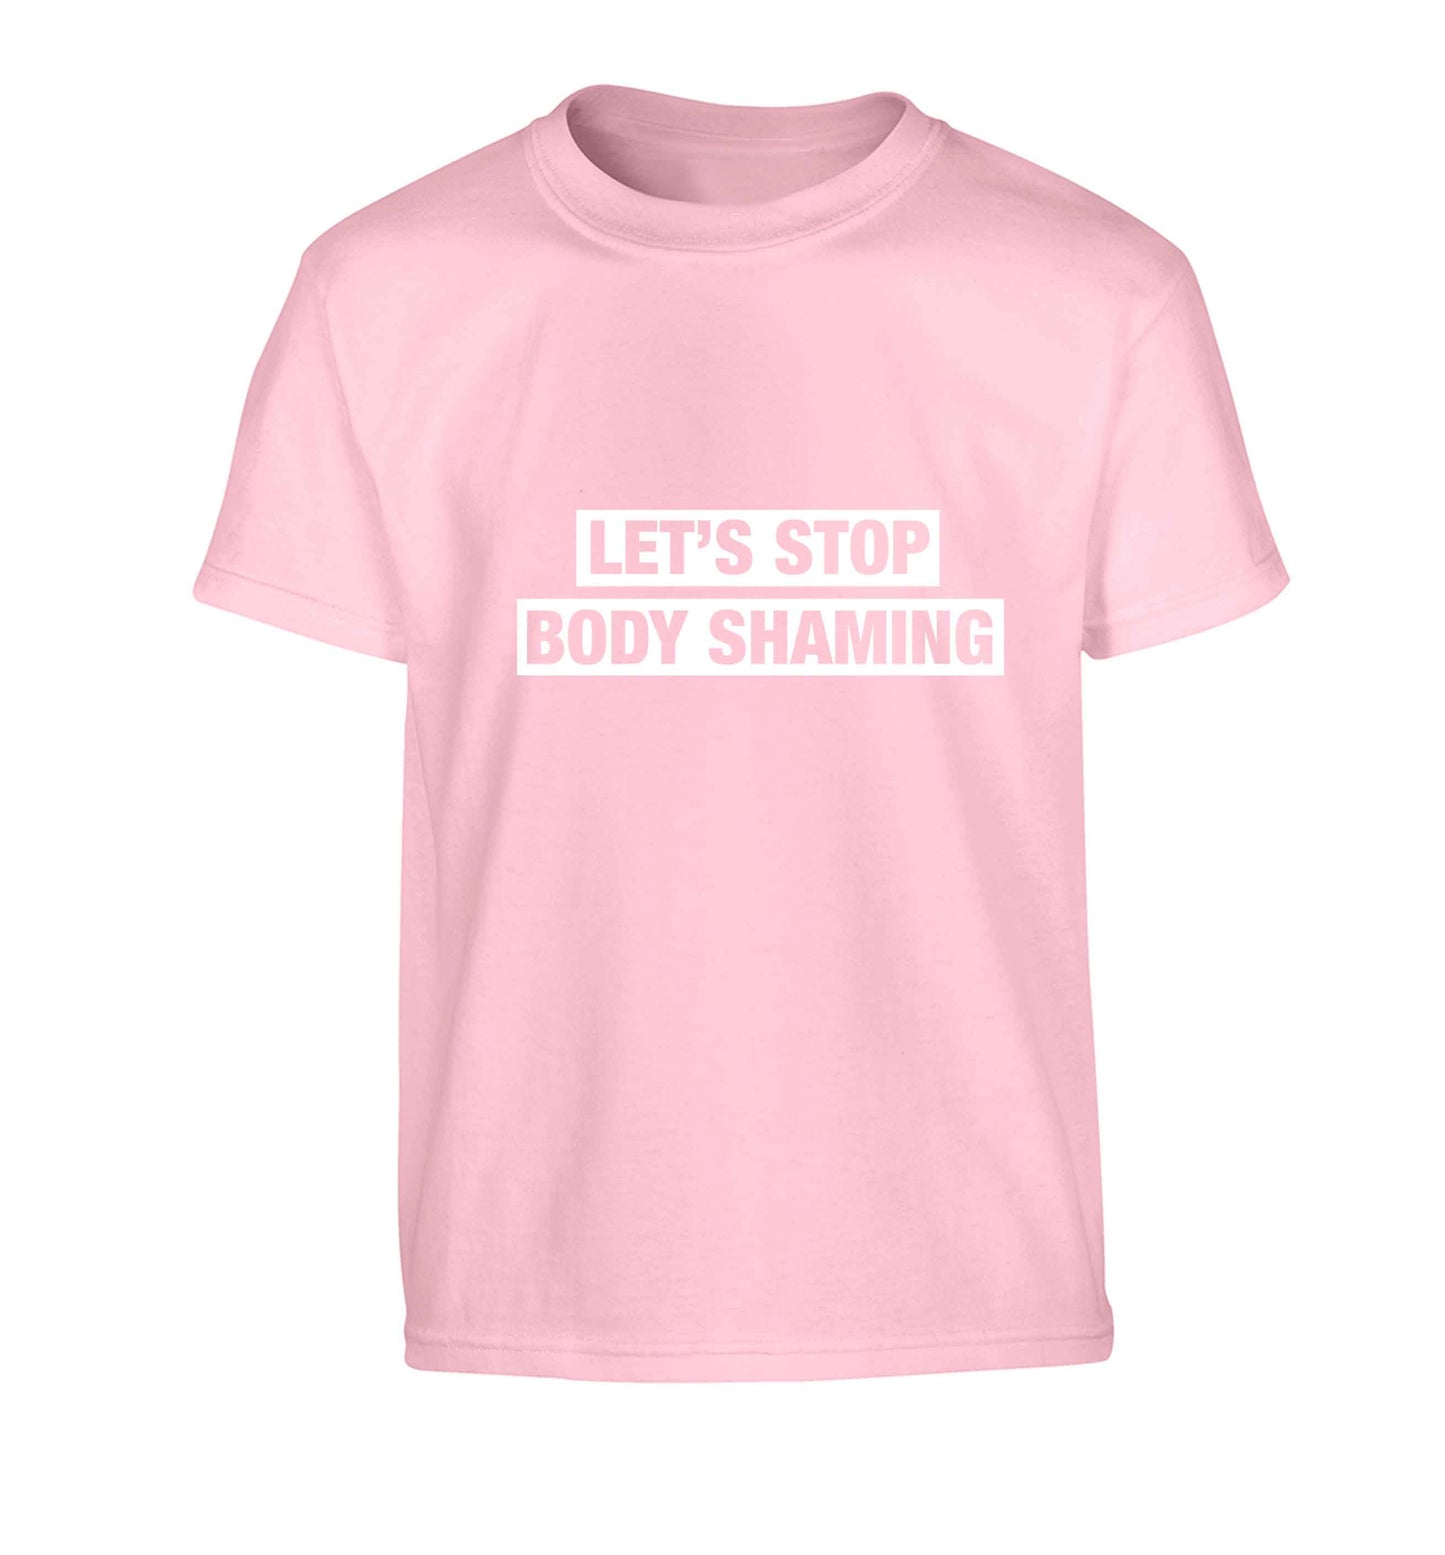 Let's stop body shaming Children's light pink Tshirt 12-13 Years